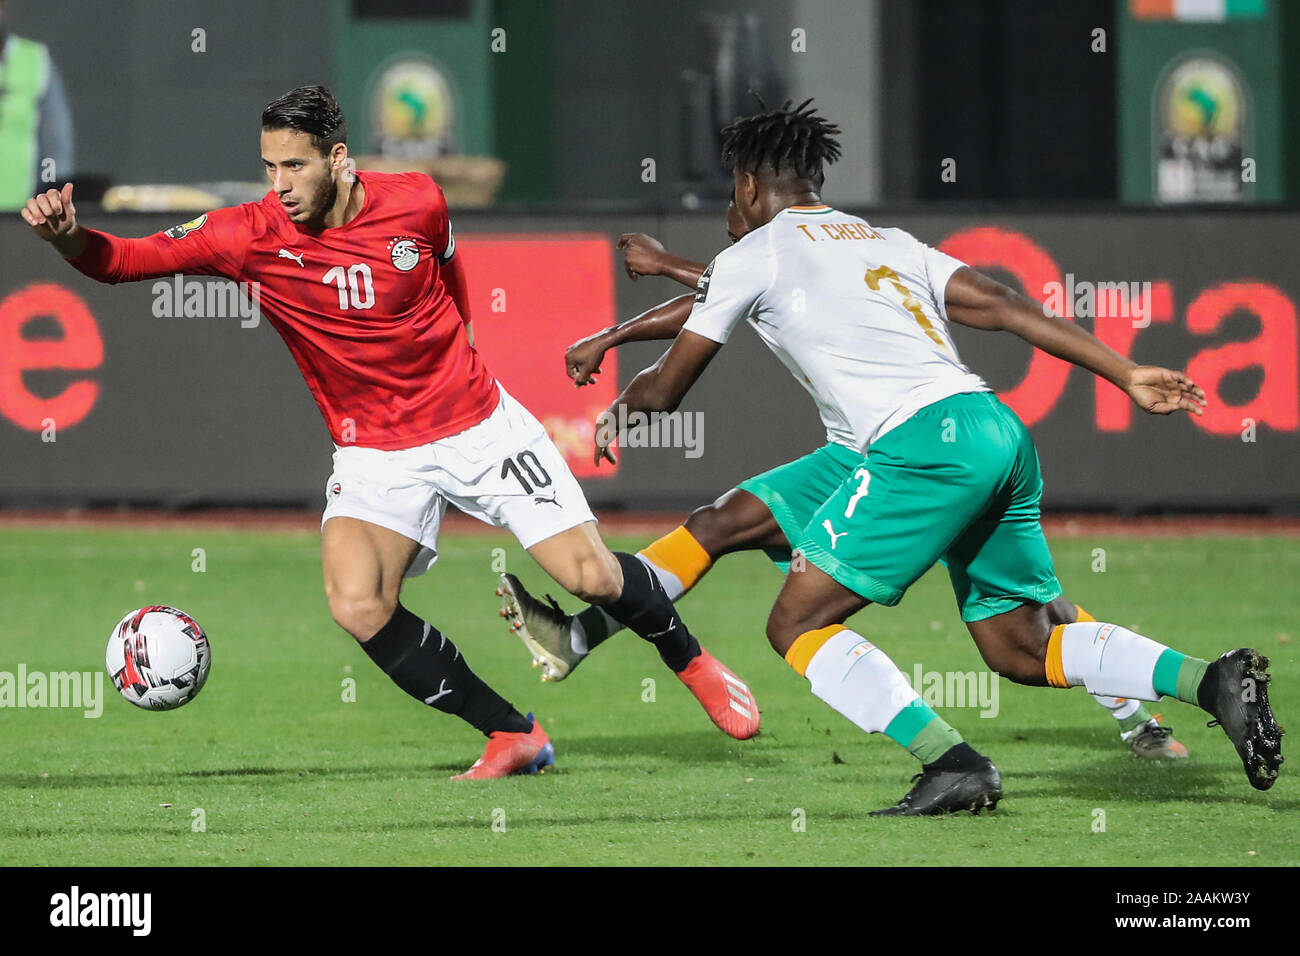 Cairo, Egypt. 22nd Nov, 2019. Egypt's Ramadan Sobhi (L) and Cote d'Ivoire's Cheick Timite battle for the ball during the Africa U-23 Cup of Nations final soccer match between Egypt and Ivory Coast at the Cairo International Stadium. Credit: Omar Zoheiry/dpa/Alamy Live News Stock Photo